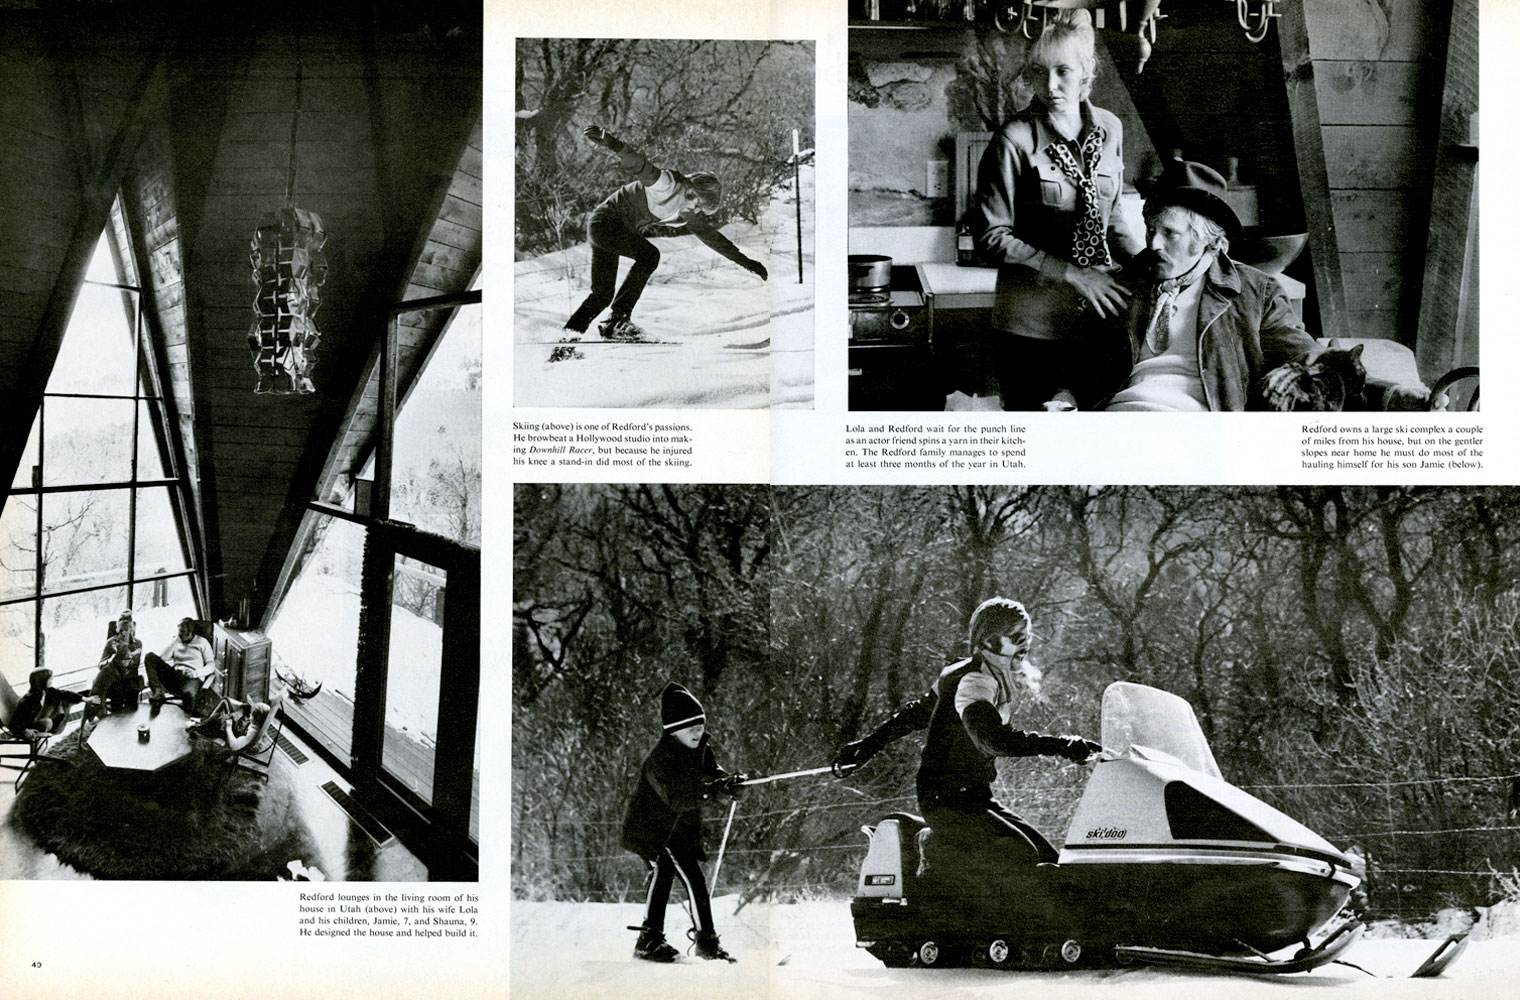 Page spreads from the February 6, 1970, issue of LIFE magazine.